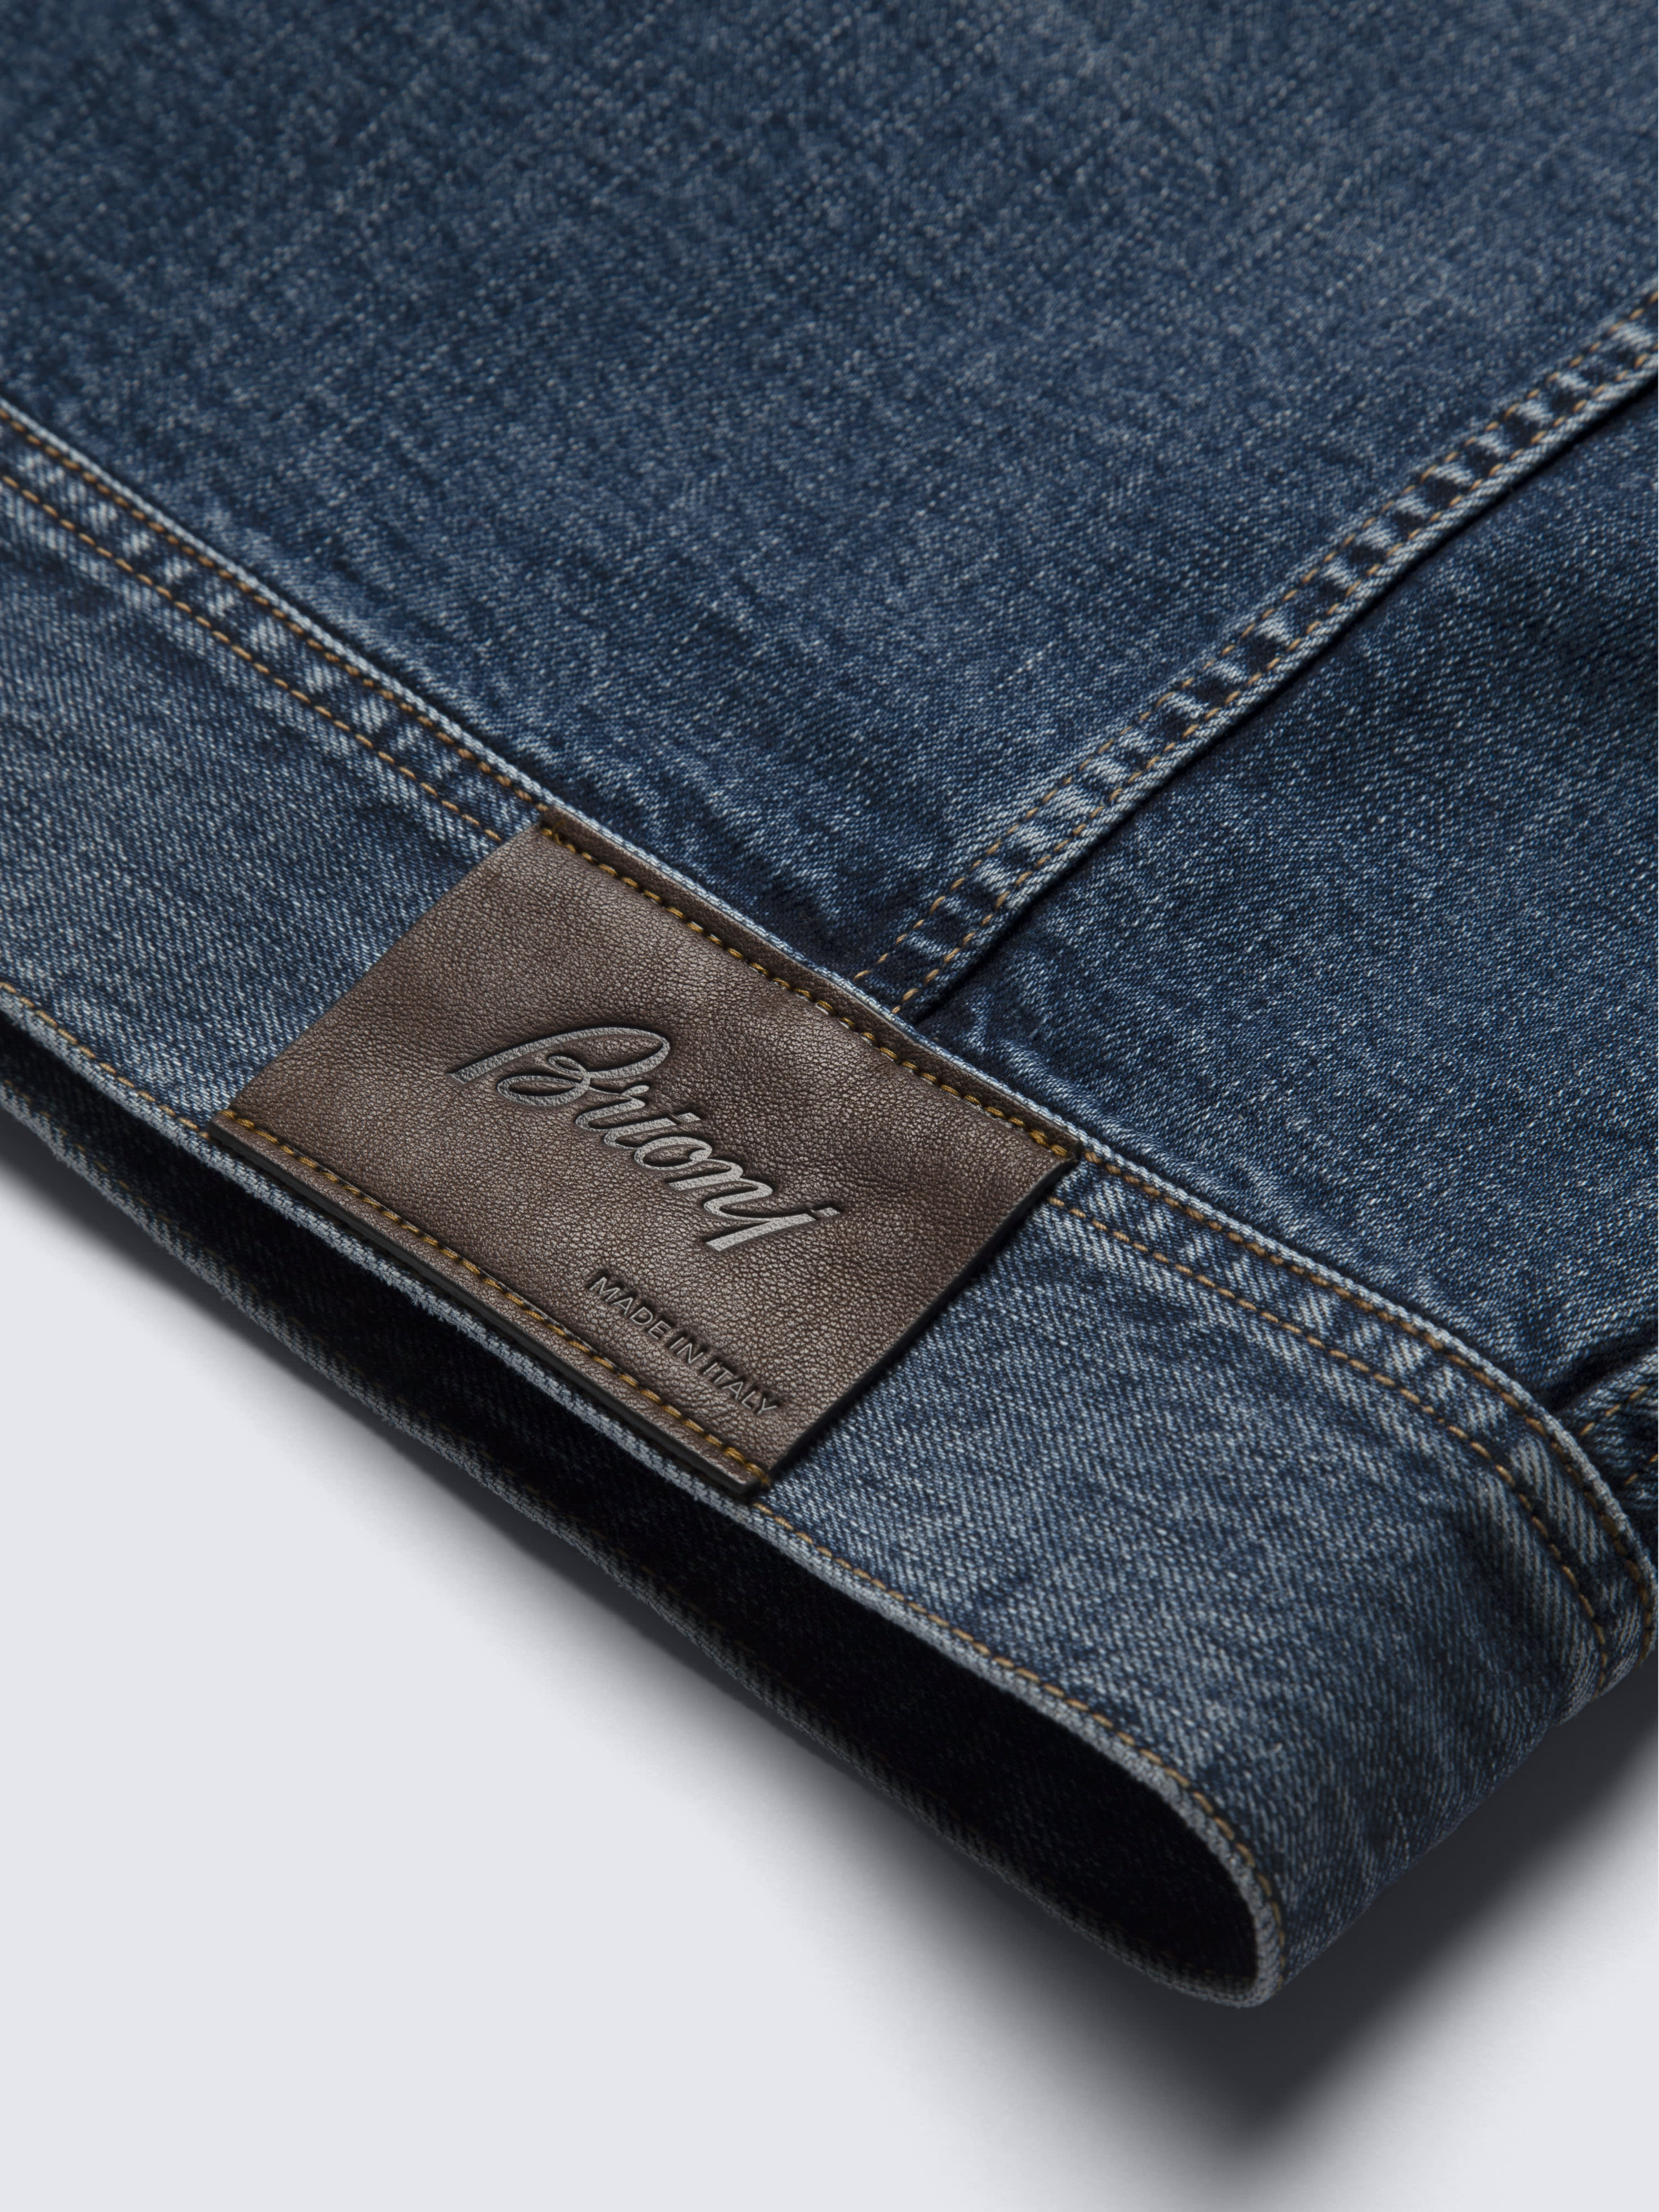 Handcrafted Custom Bespoke Japanese Selvedge Denim: Exquisite Tailoring and  Unmatched Quality, Made to Order -  Ireland